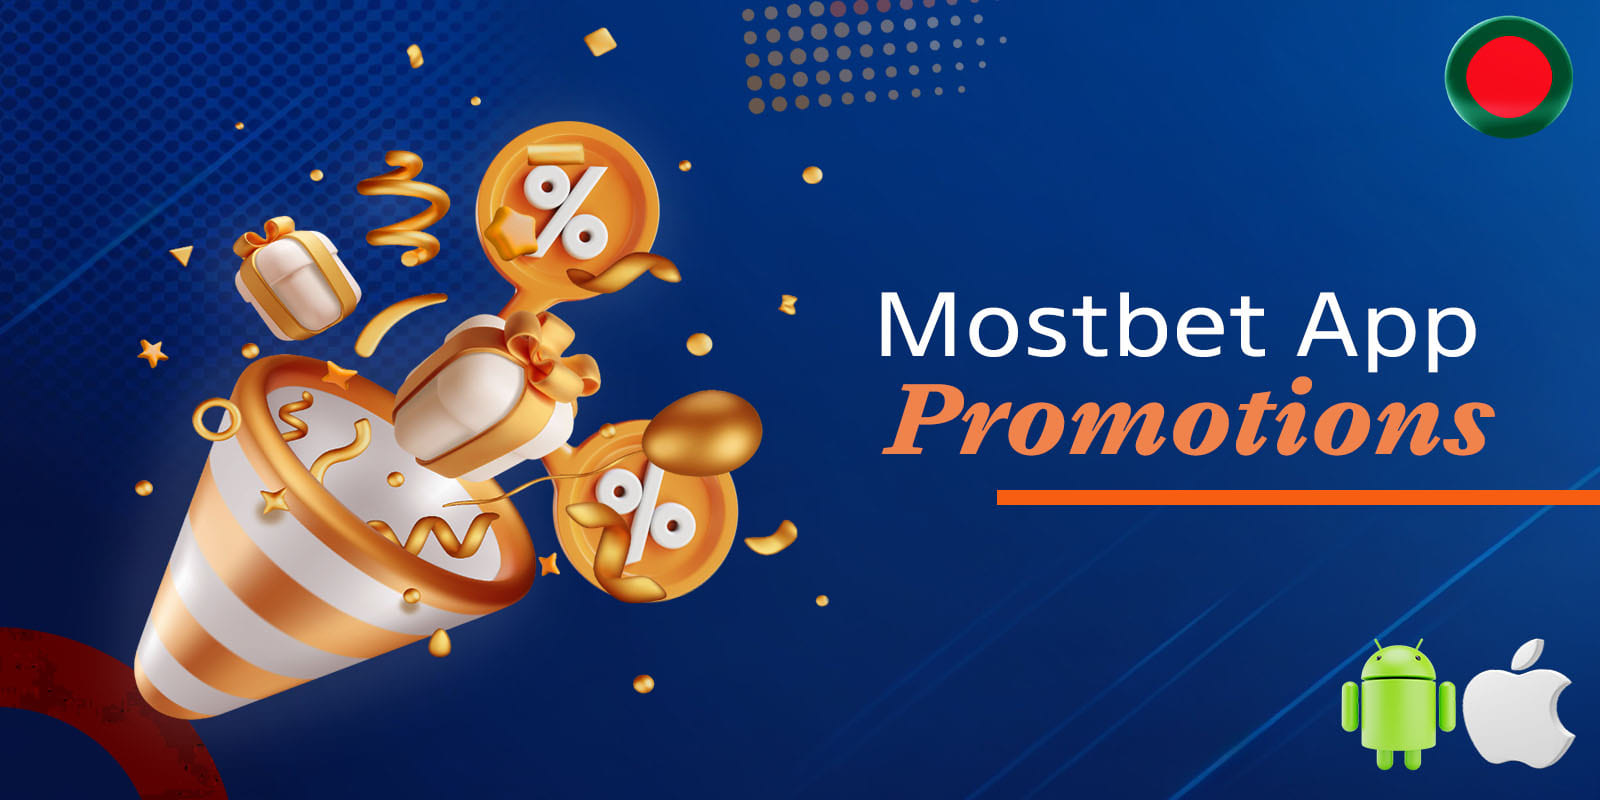 Promotions in the Mostbet app